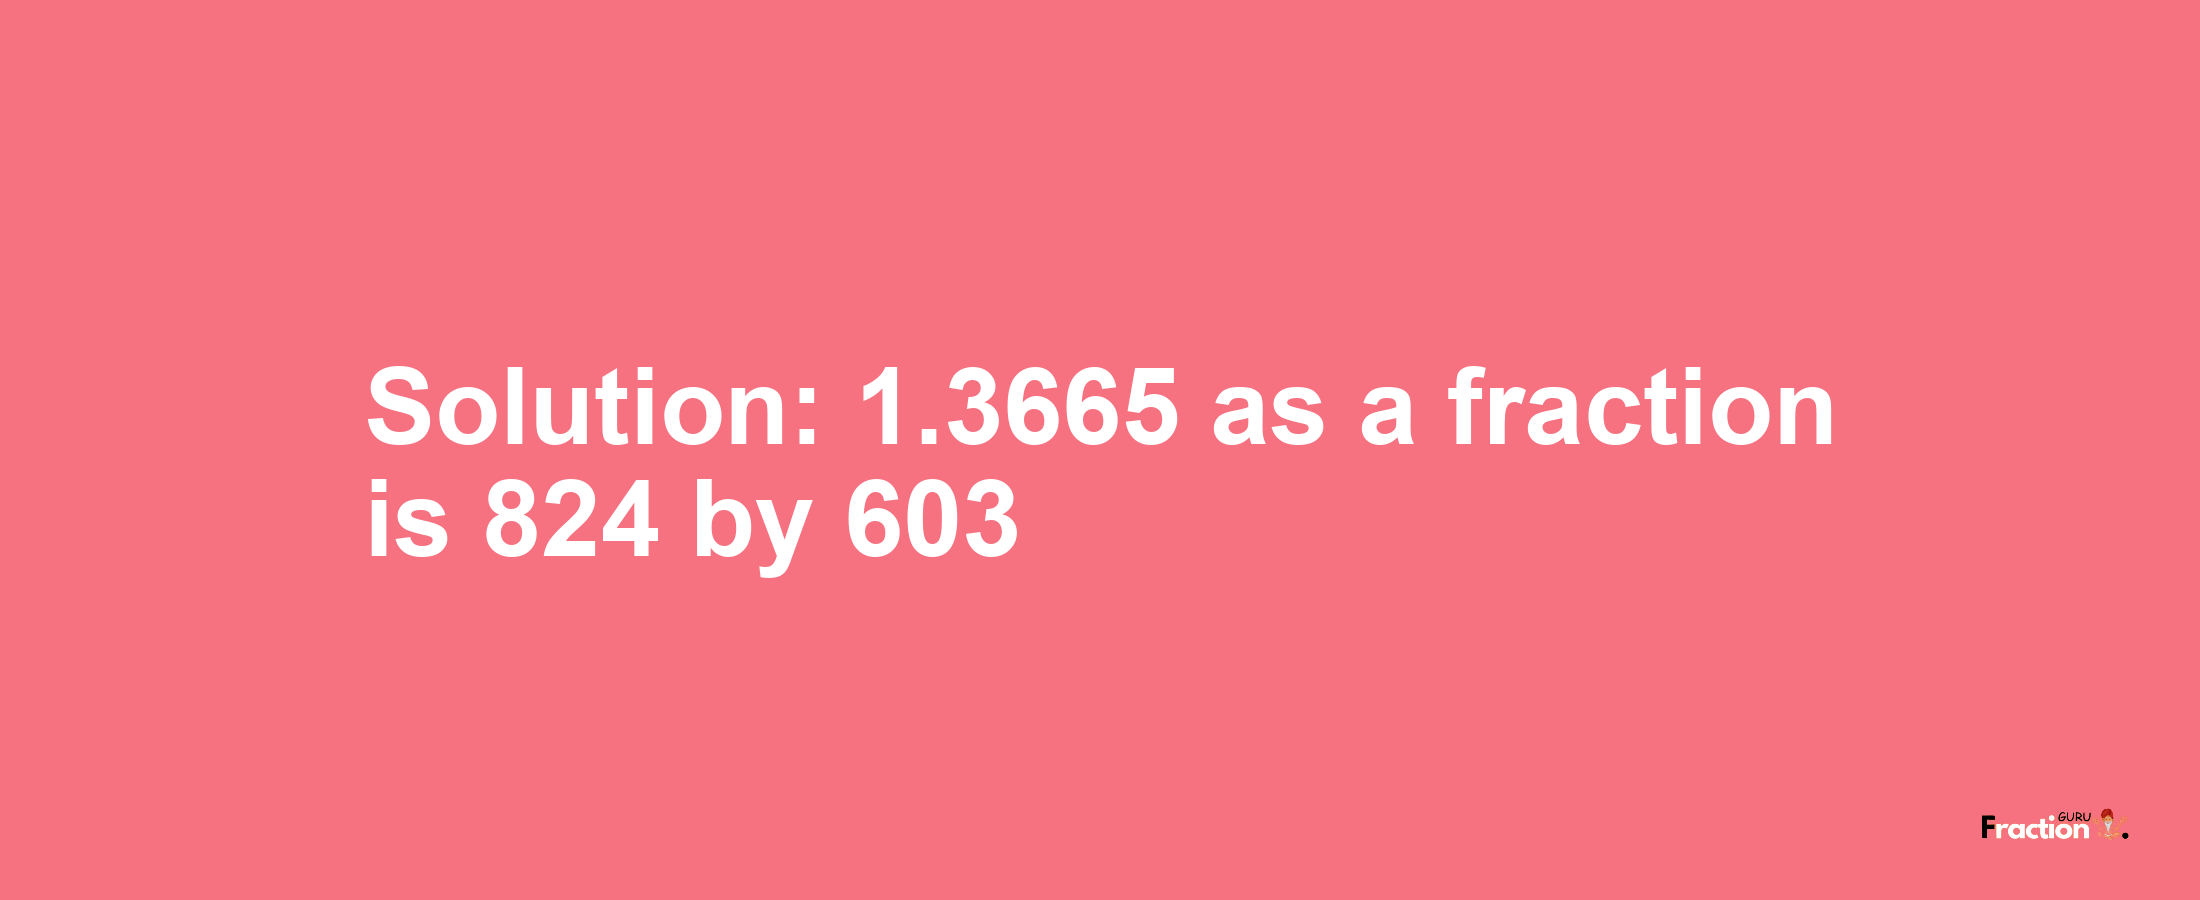 Solution:1.3665 as a fraction is 824/603